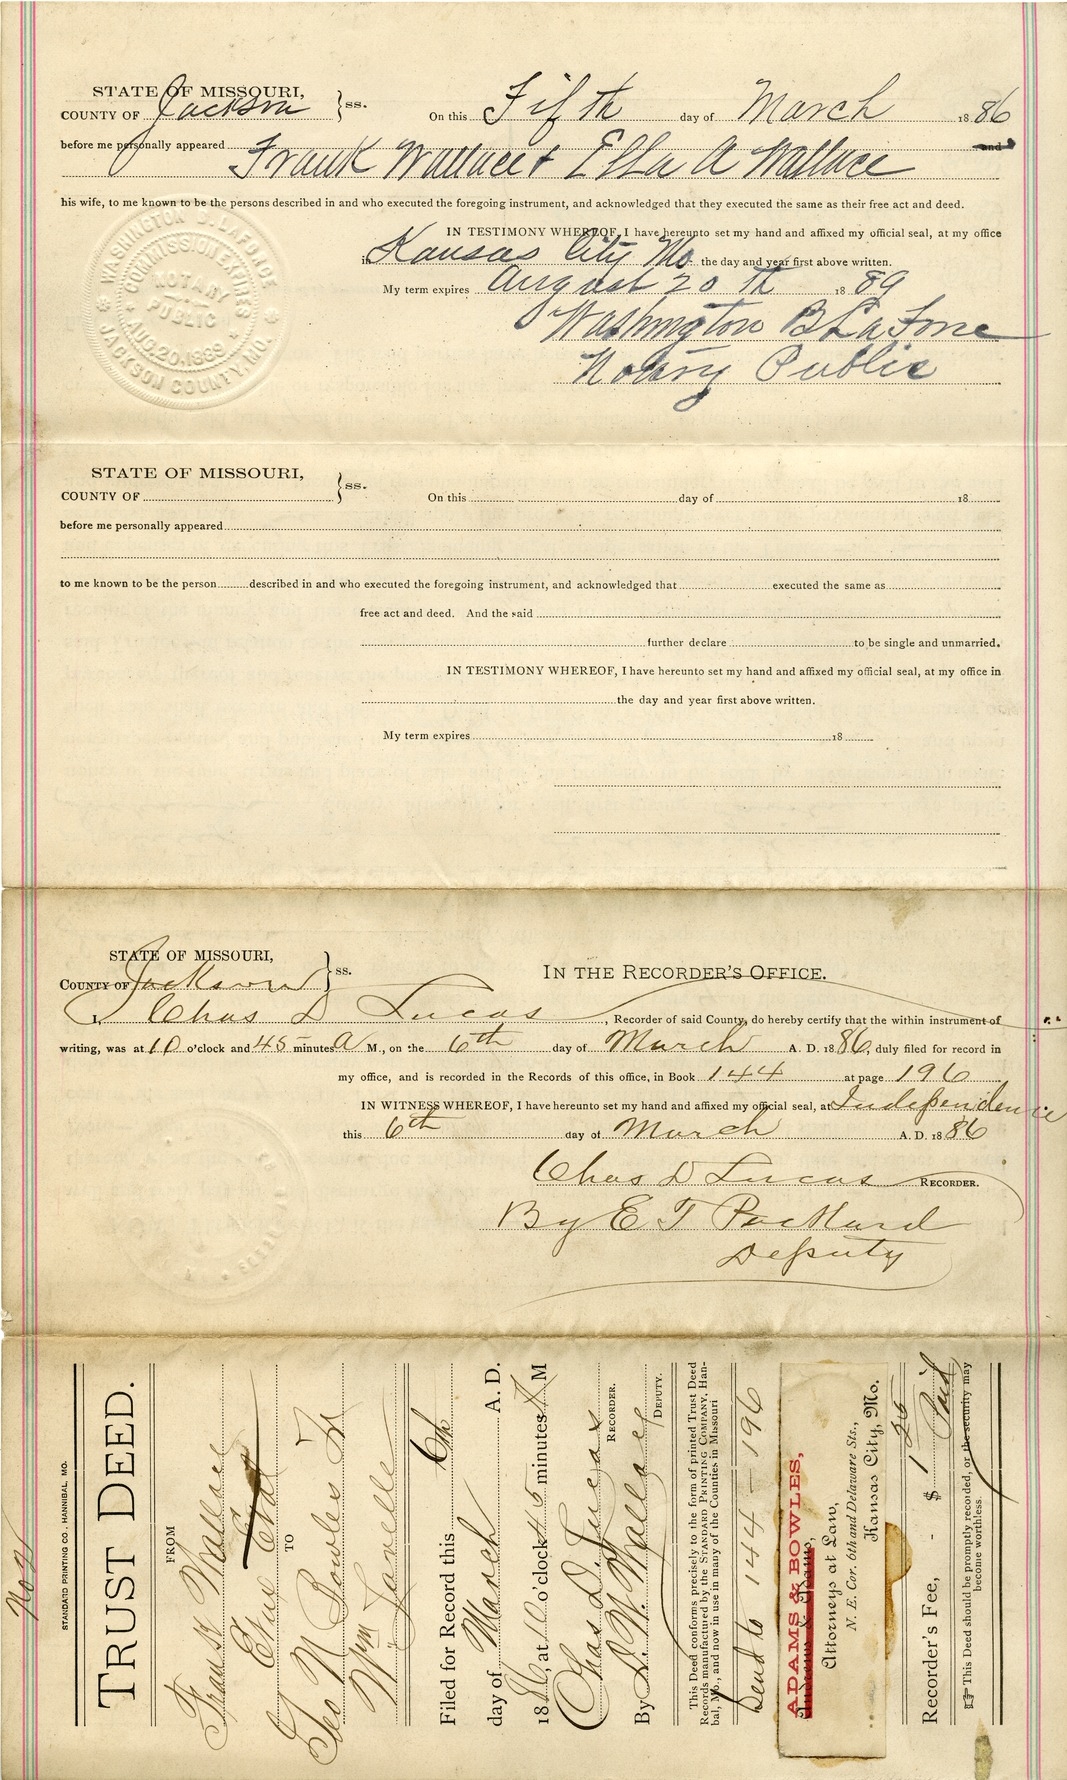 Trust Deed from Frank Wallace and Ella A. Wallace to George N. Bowles and William Lavelle